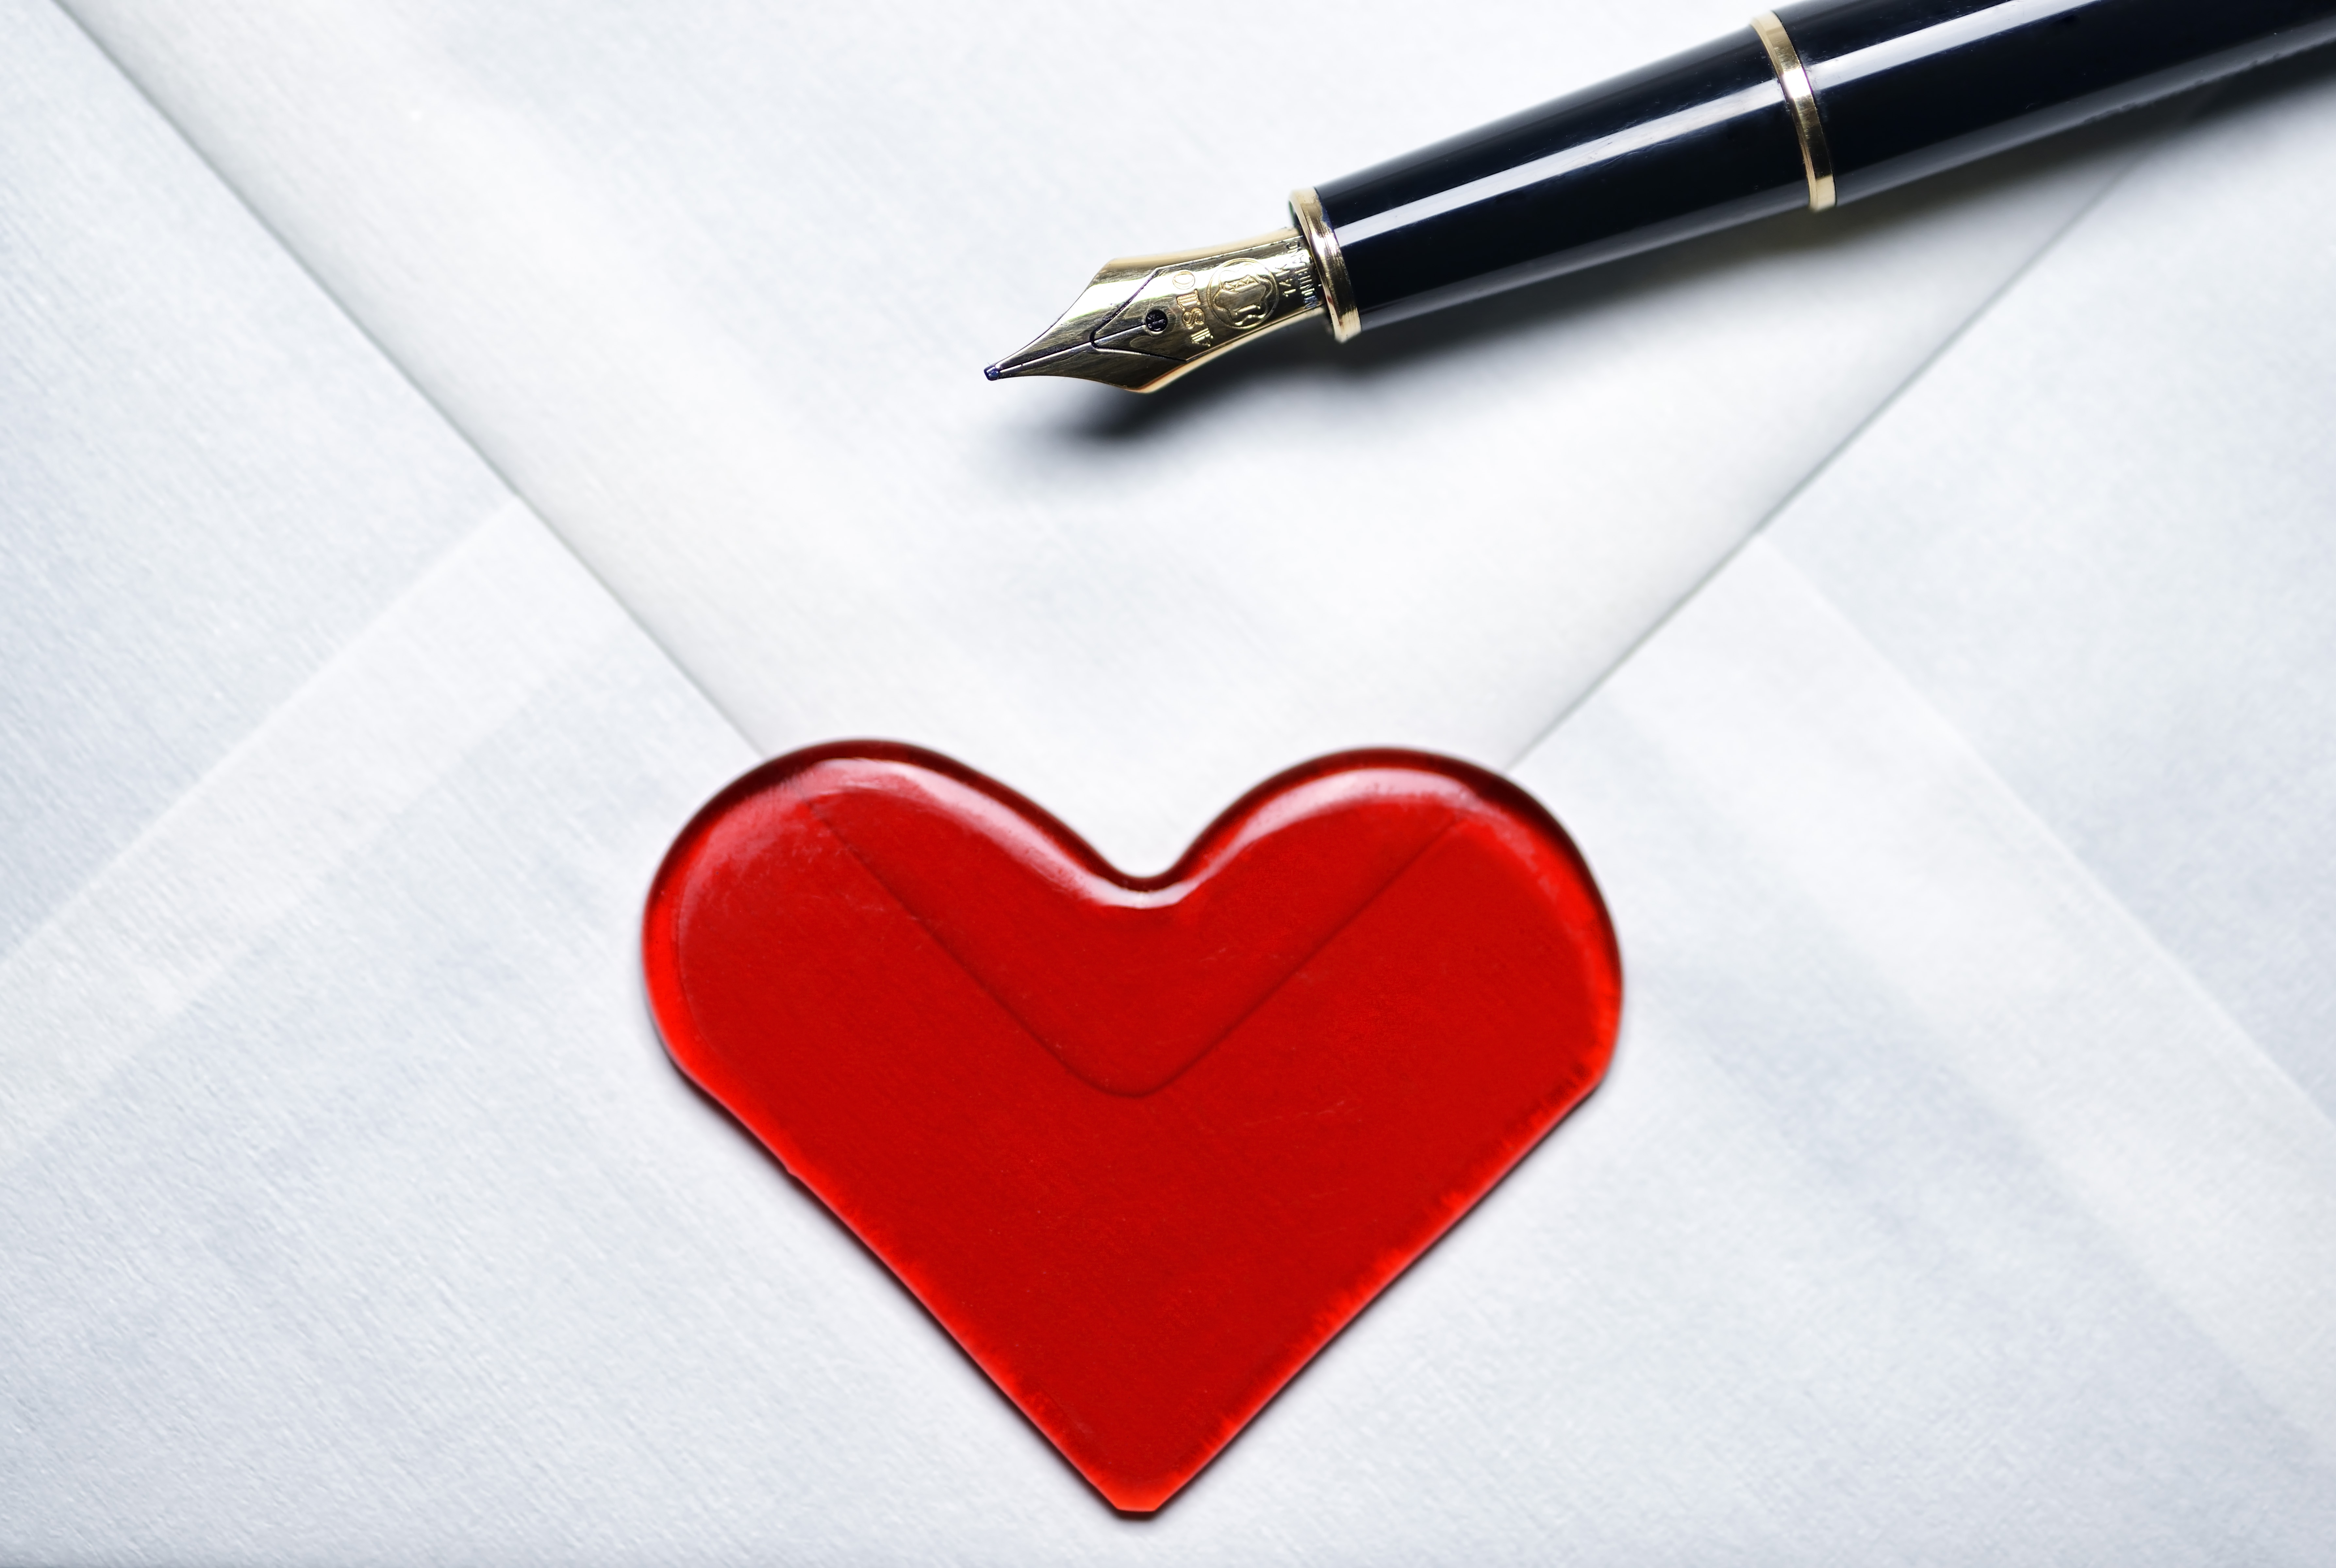 Online vs offline dating: “I sent a love letter by post and was rejected”